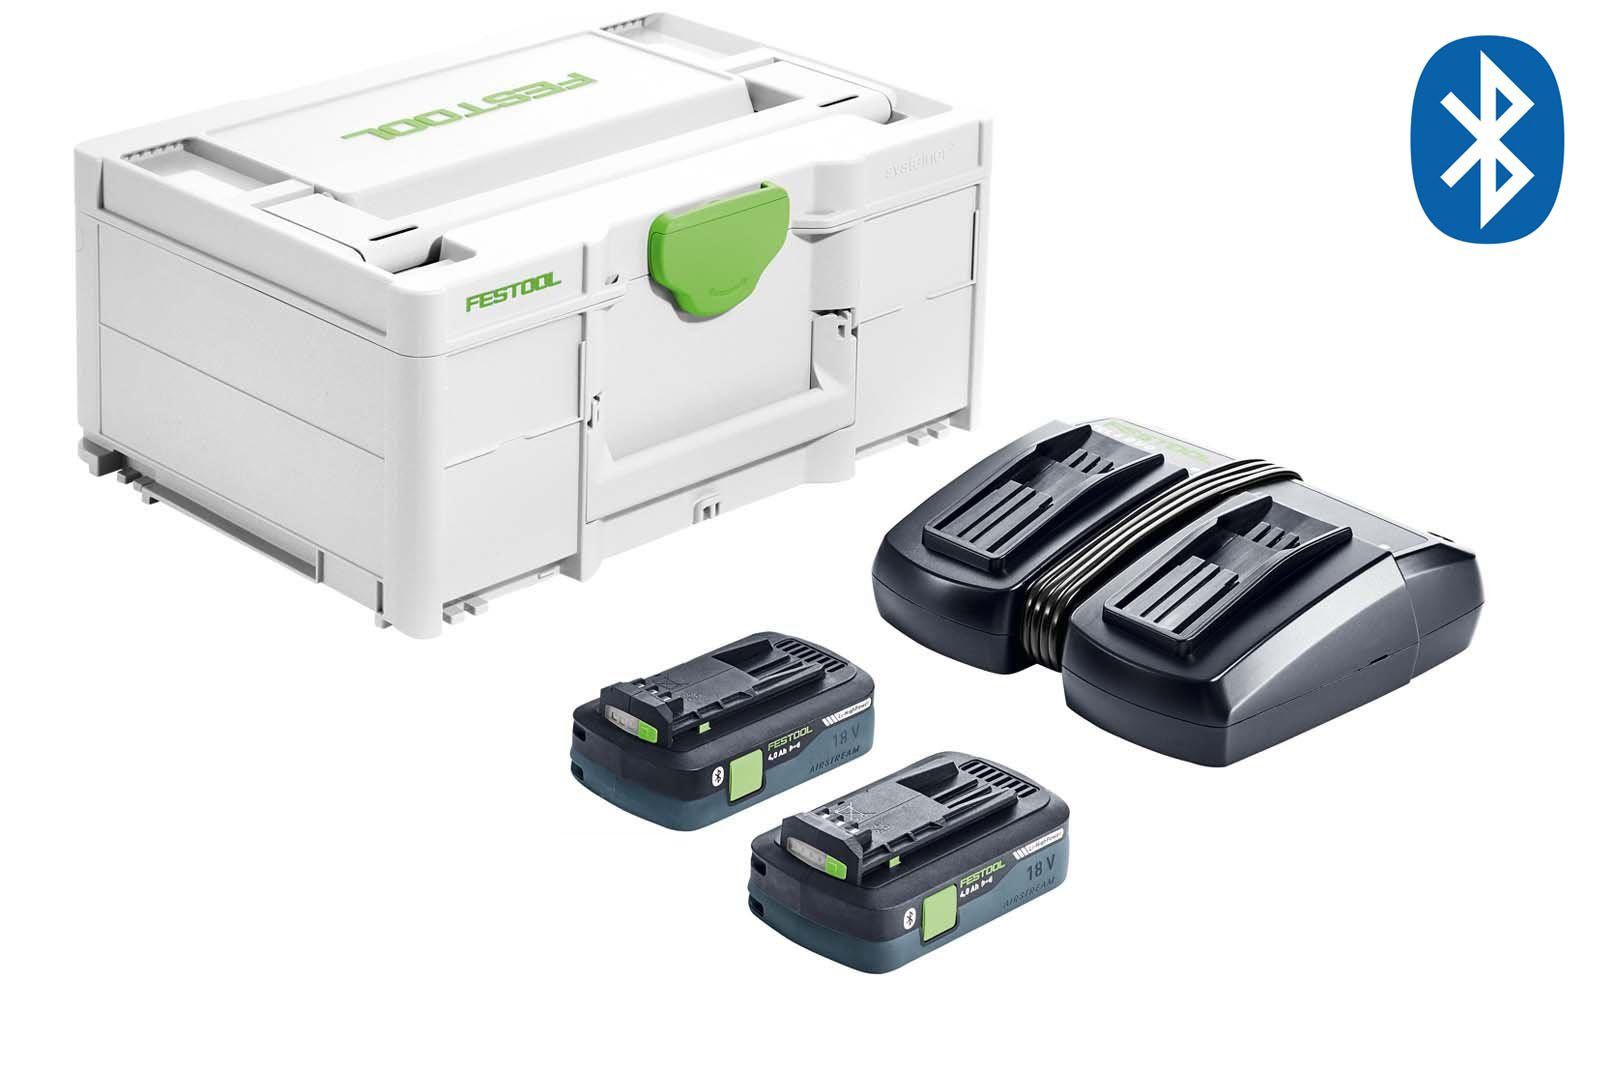 SYS 18V Energy Set 2 x 4.0Ah TCL6 Duo in Systainer 577106 by Festool